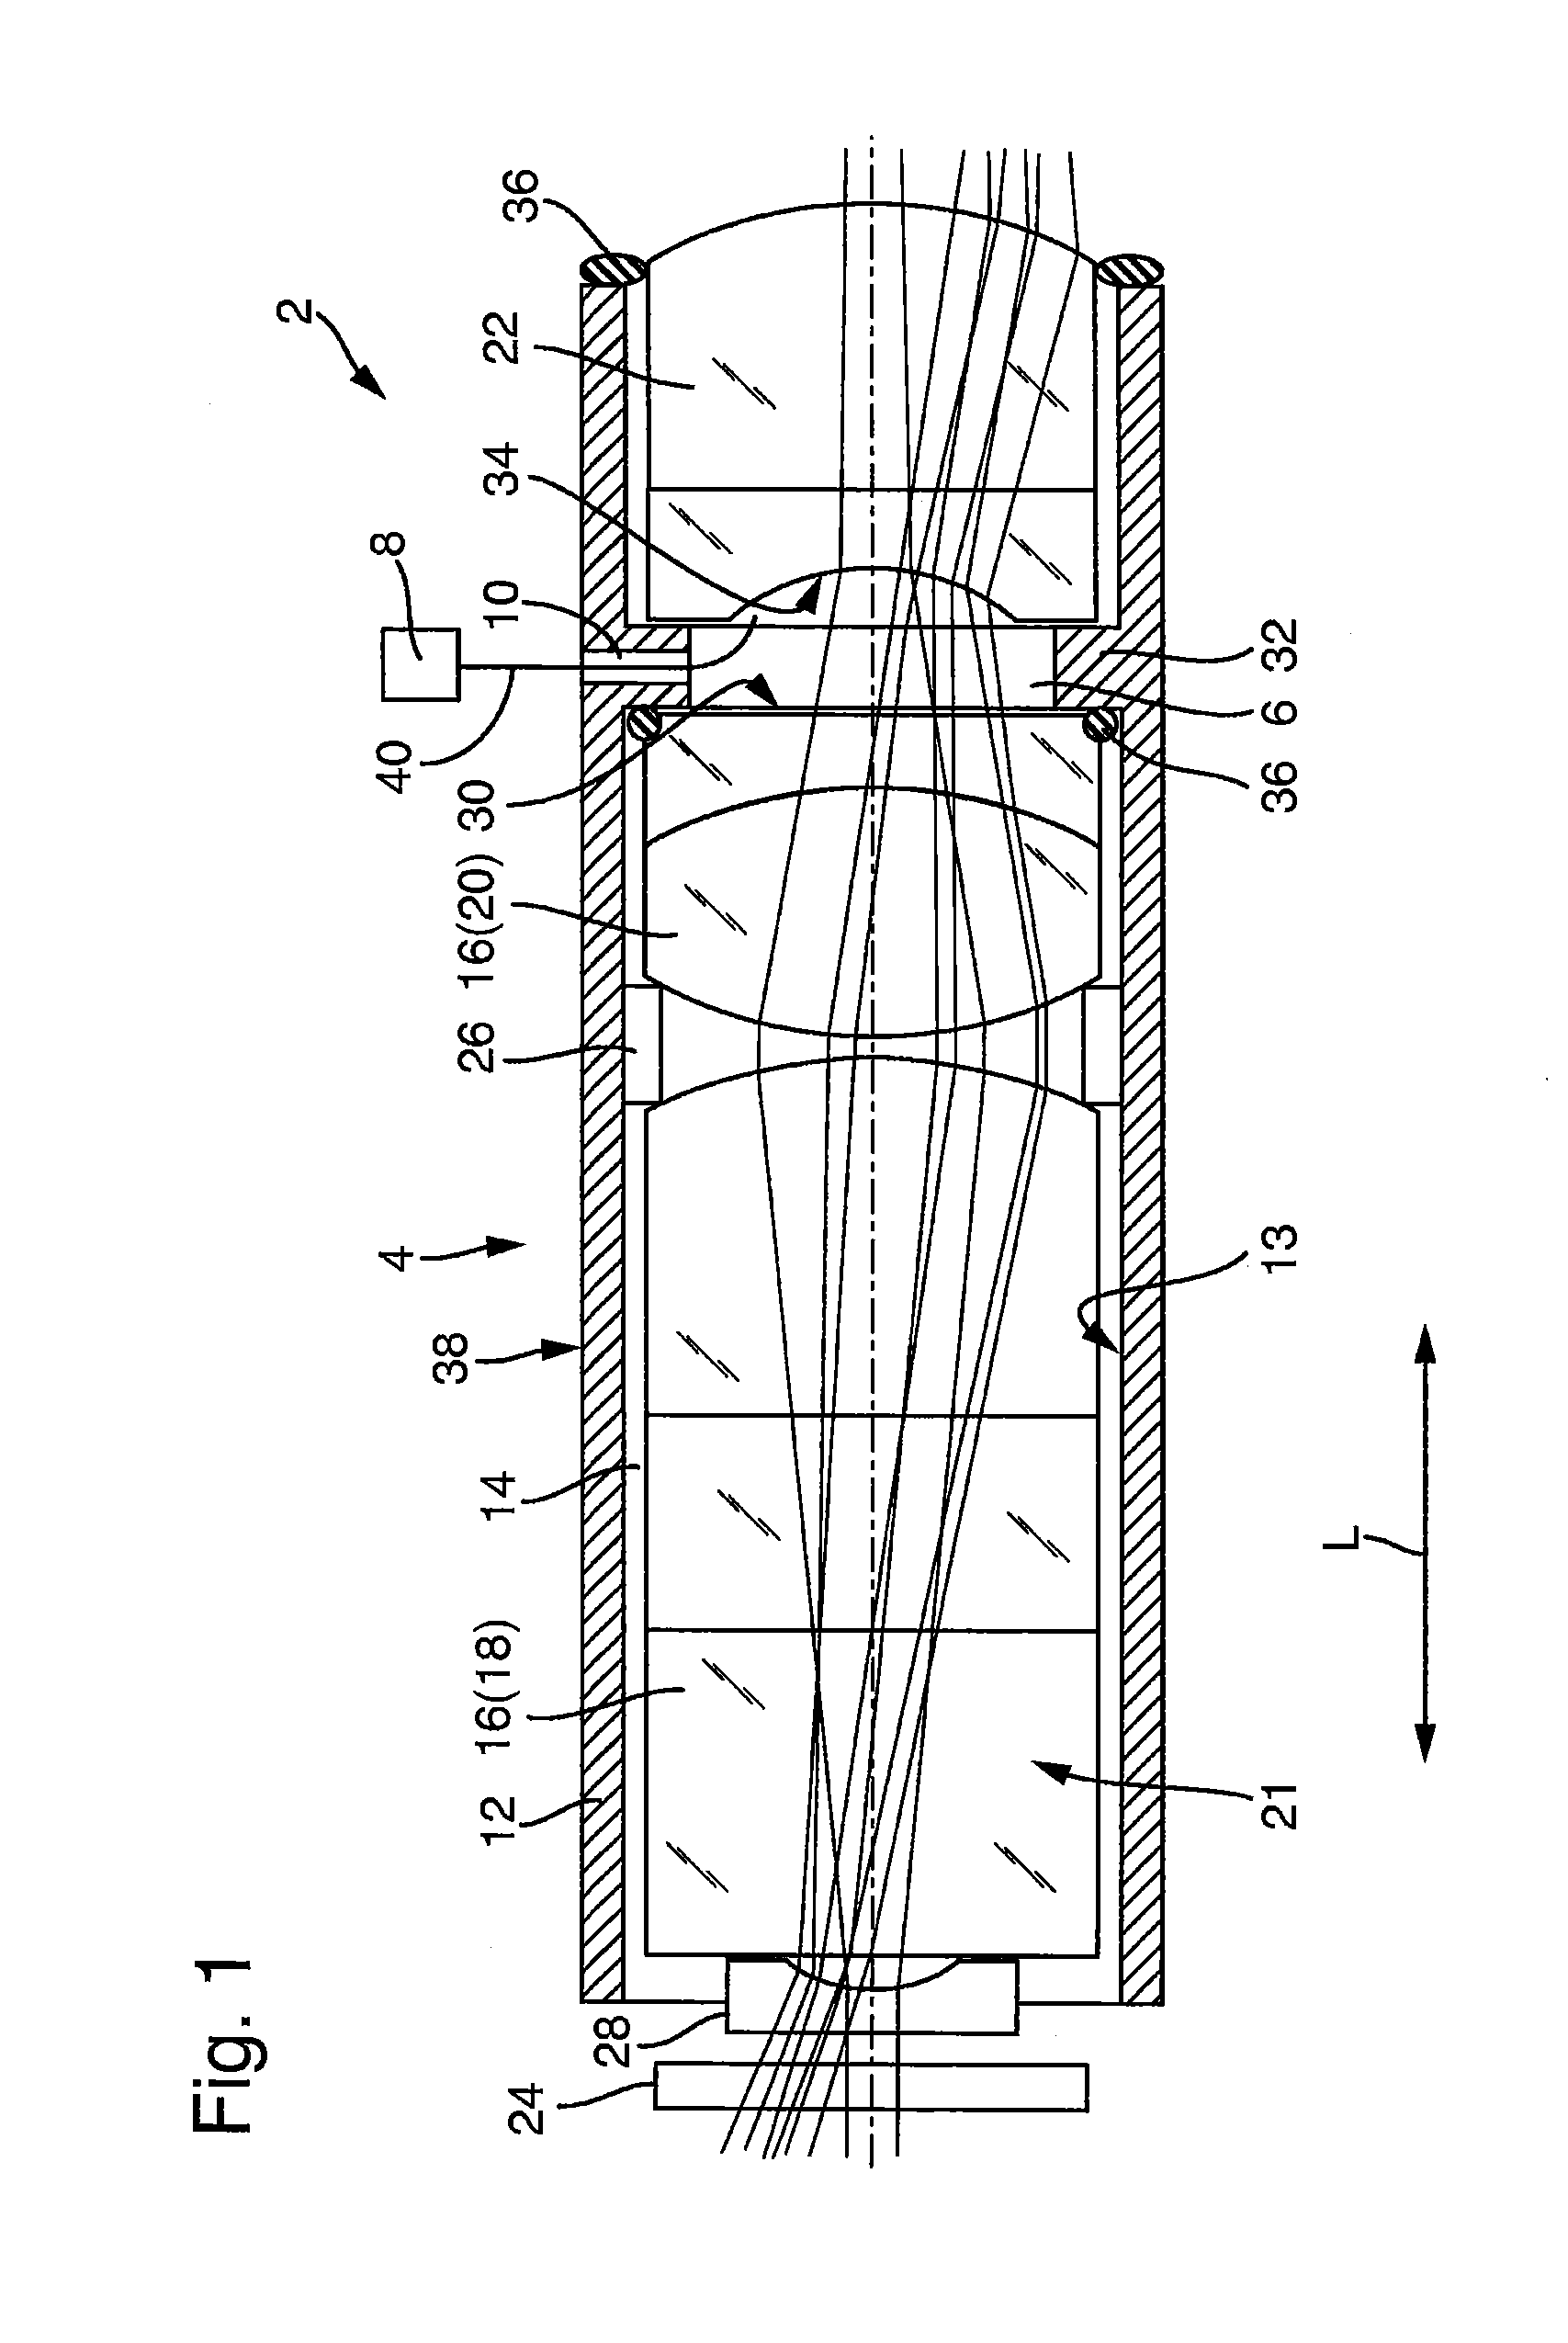 Endoscope objective, method for cleaning an endoscope objective and for repairing an endoscope